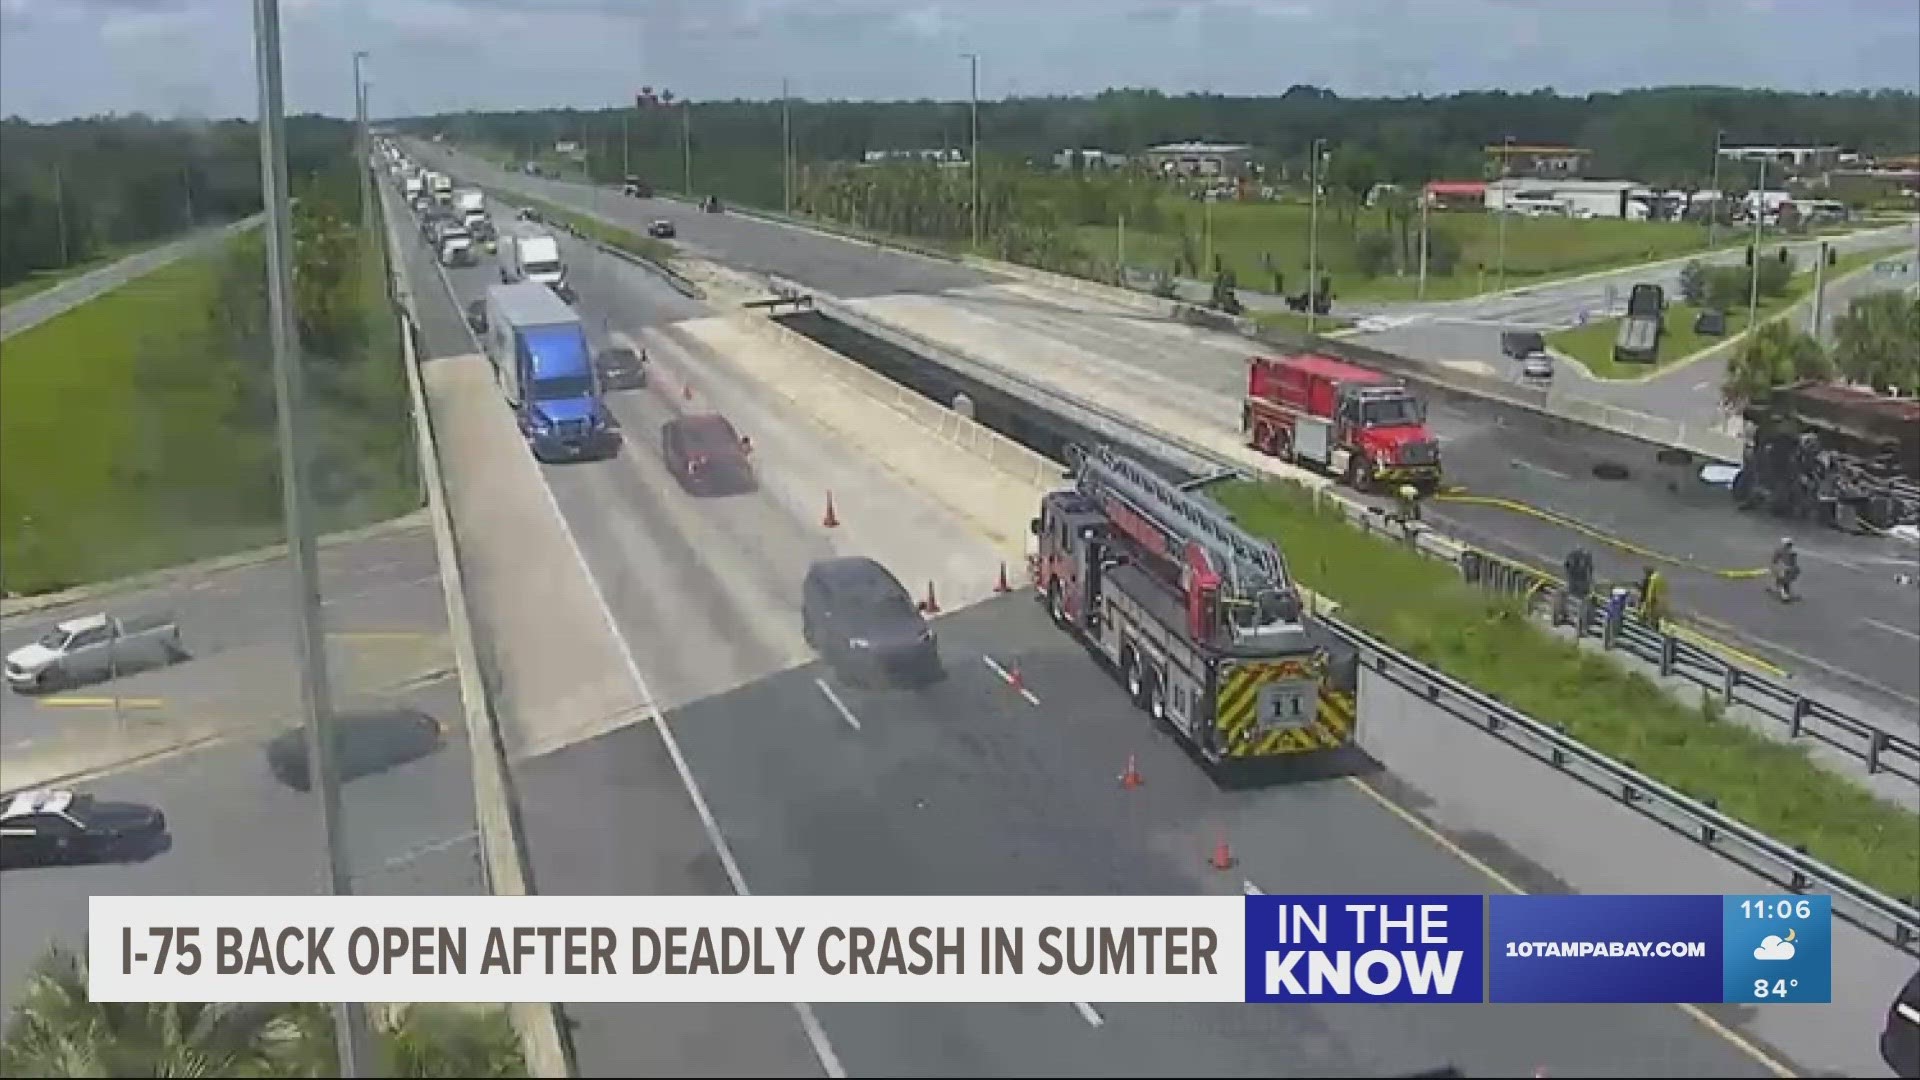 Traffic cameras showed what appeared to be a large truck on its side off the edge of the interstate.